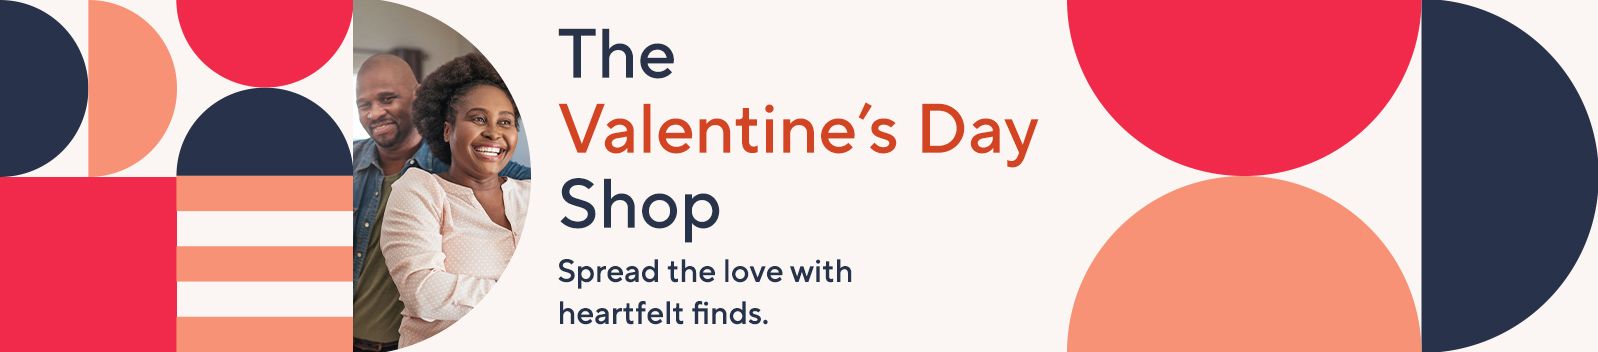 The Valentine's Day Shop: Spread the love with heartfelt finds.